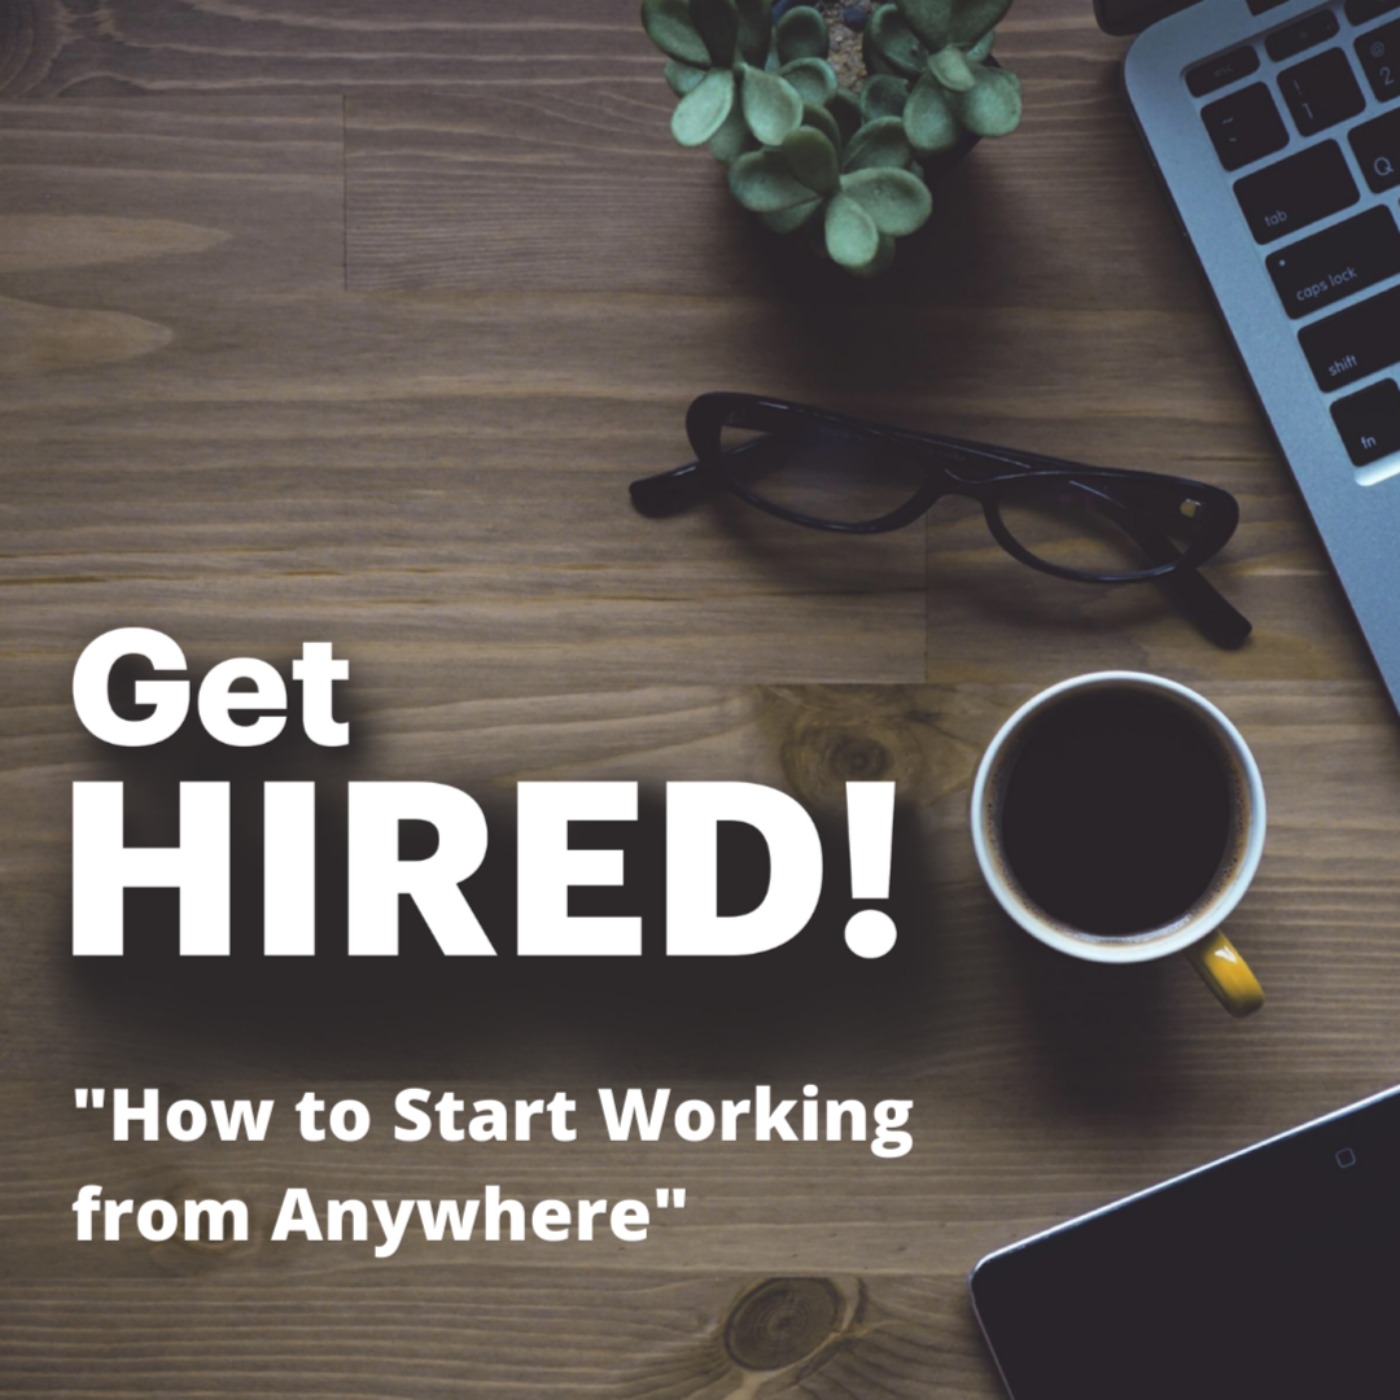 Get Hired: "How to Start Working from Anywhere"